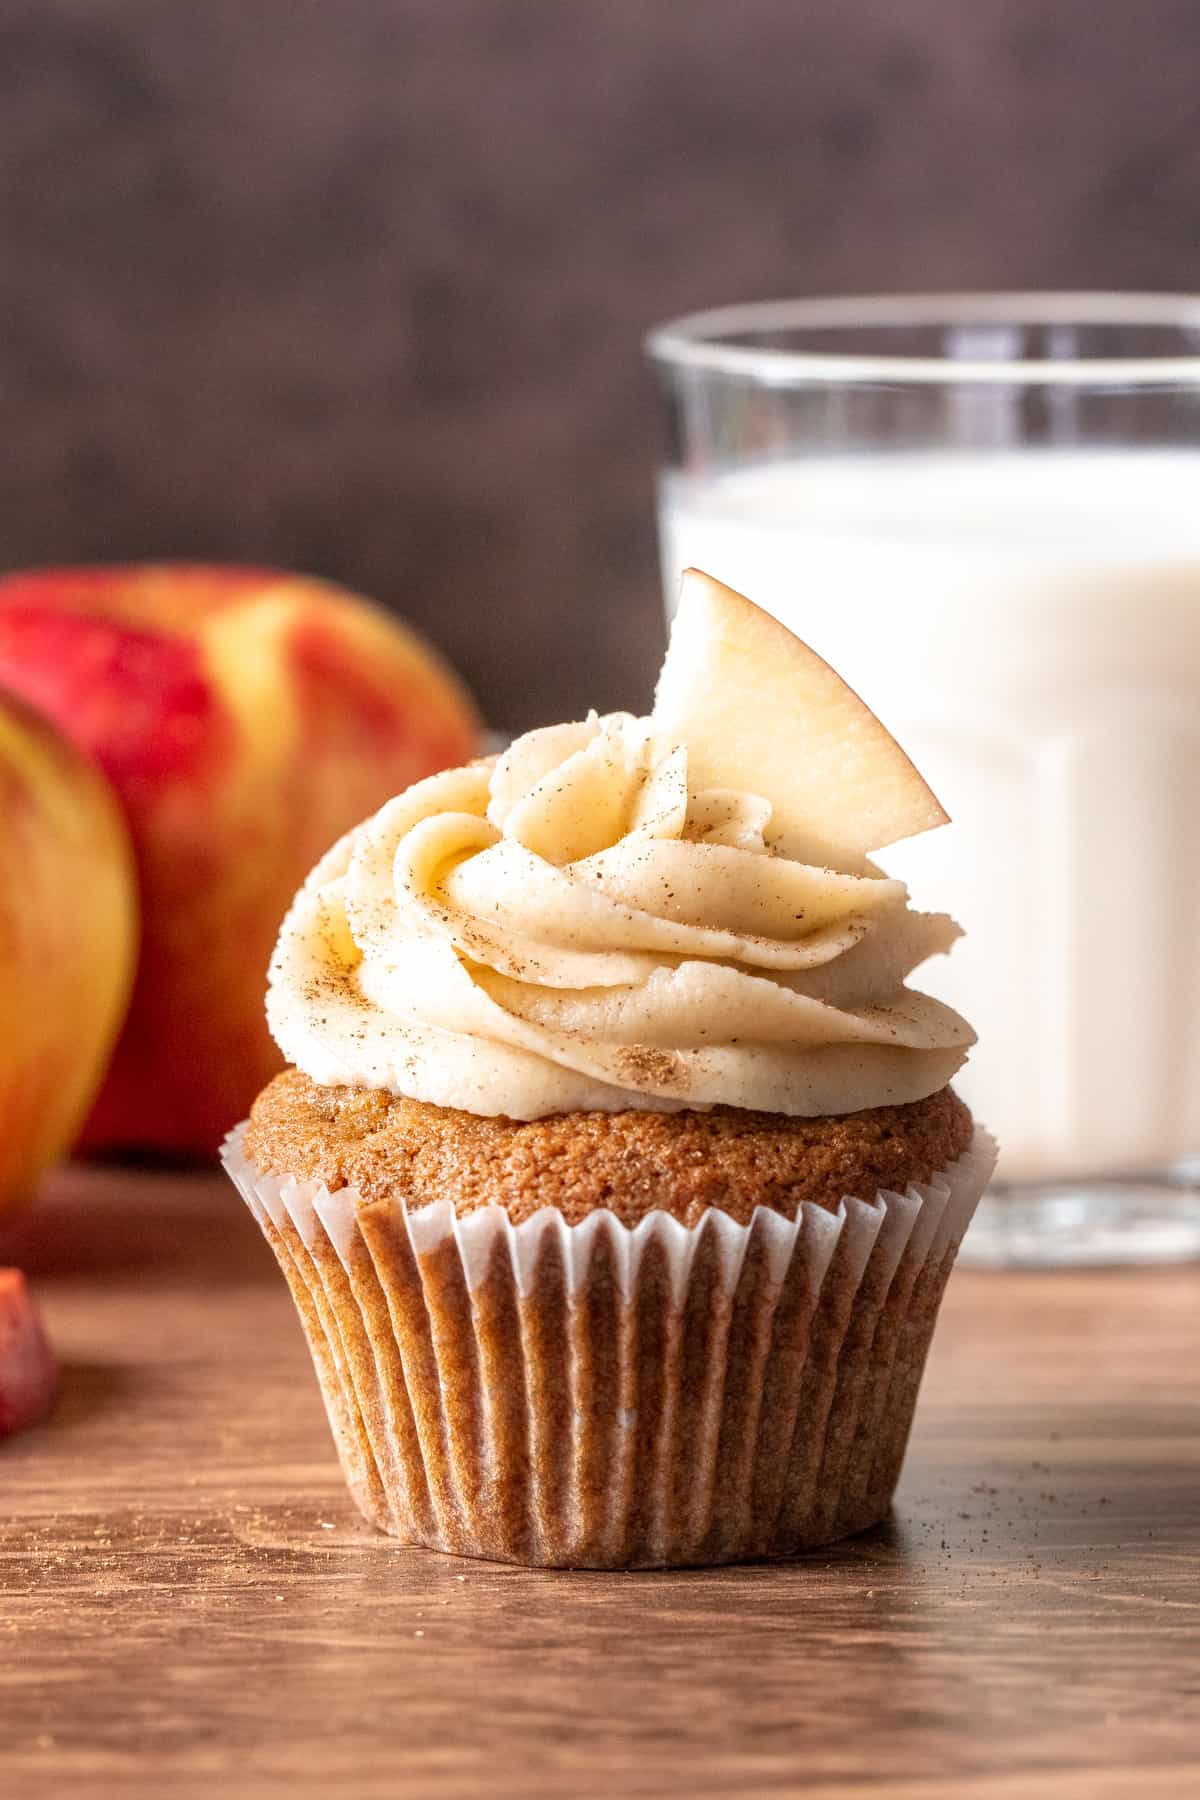 Apple cupcake with glass of milk and 2 apples